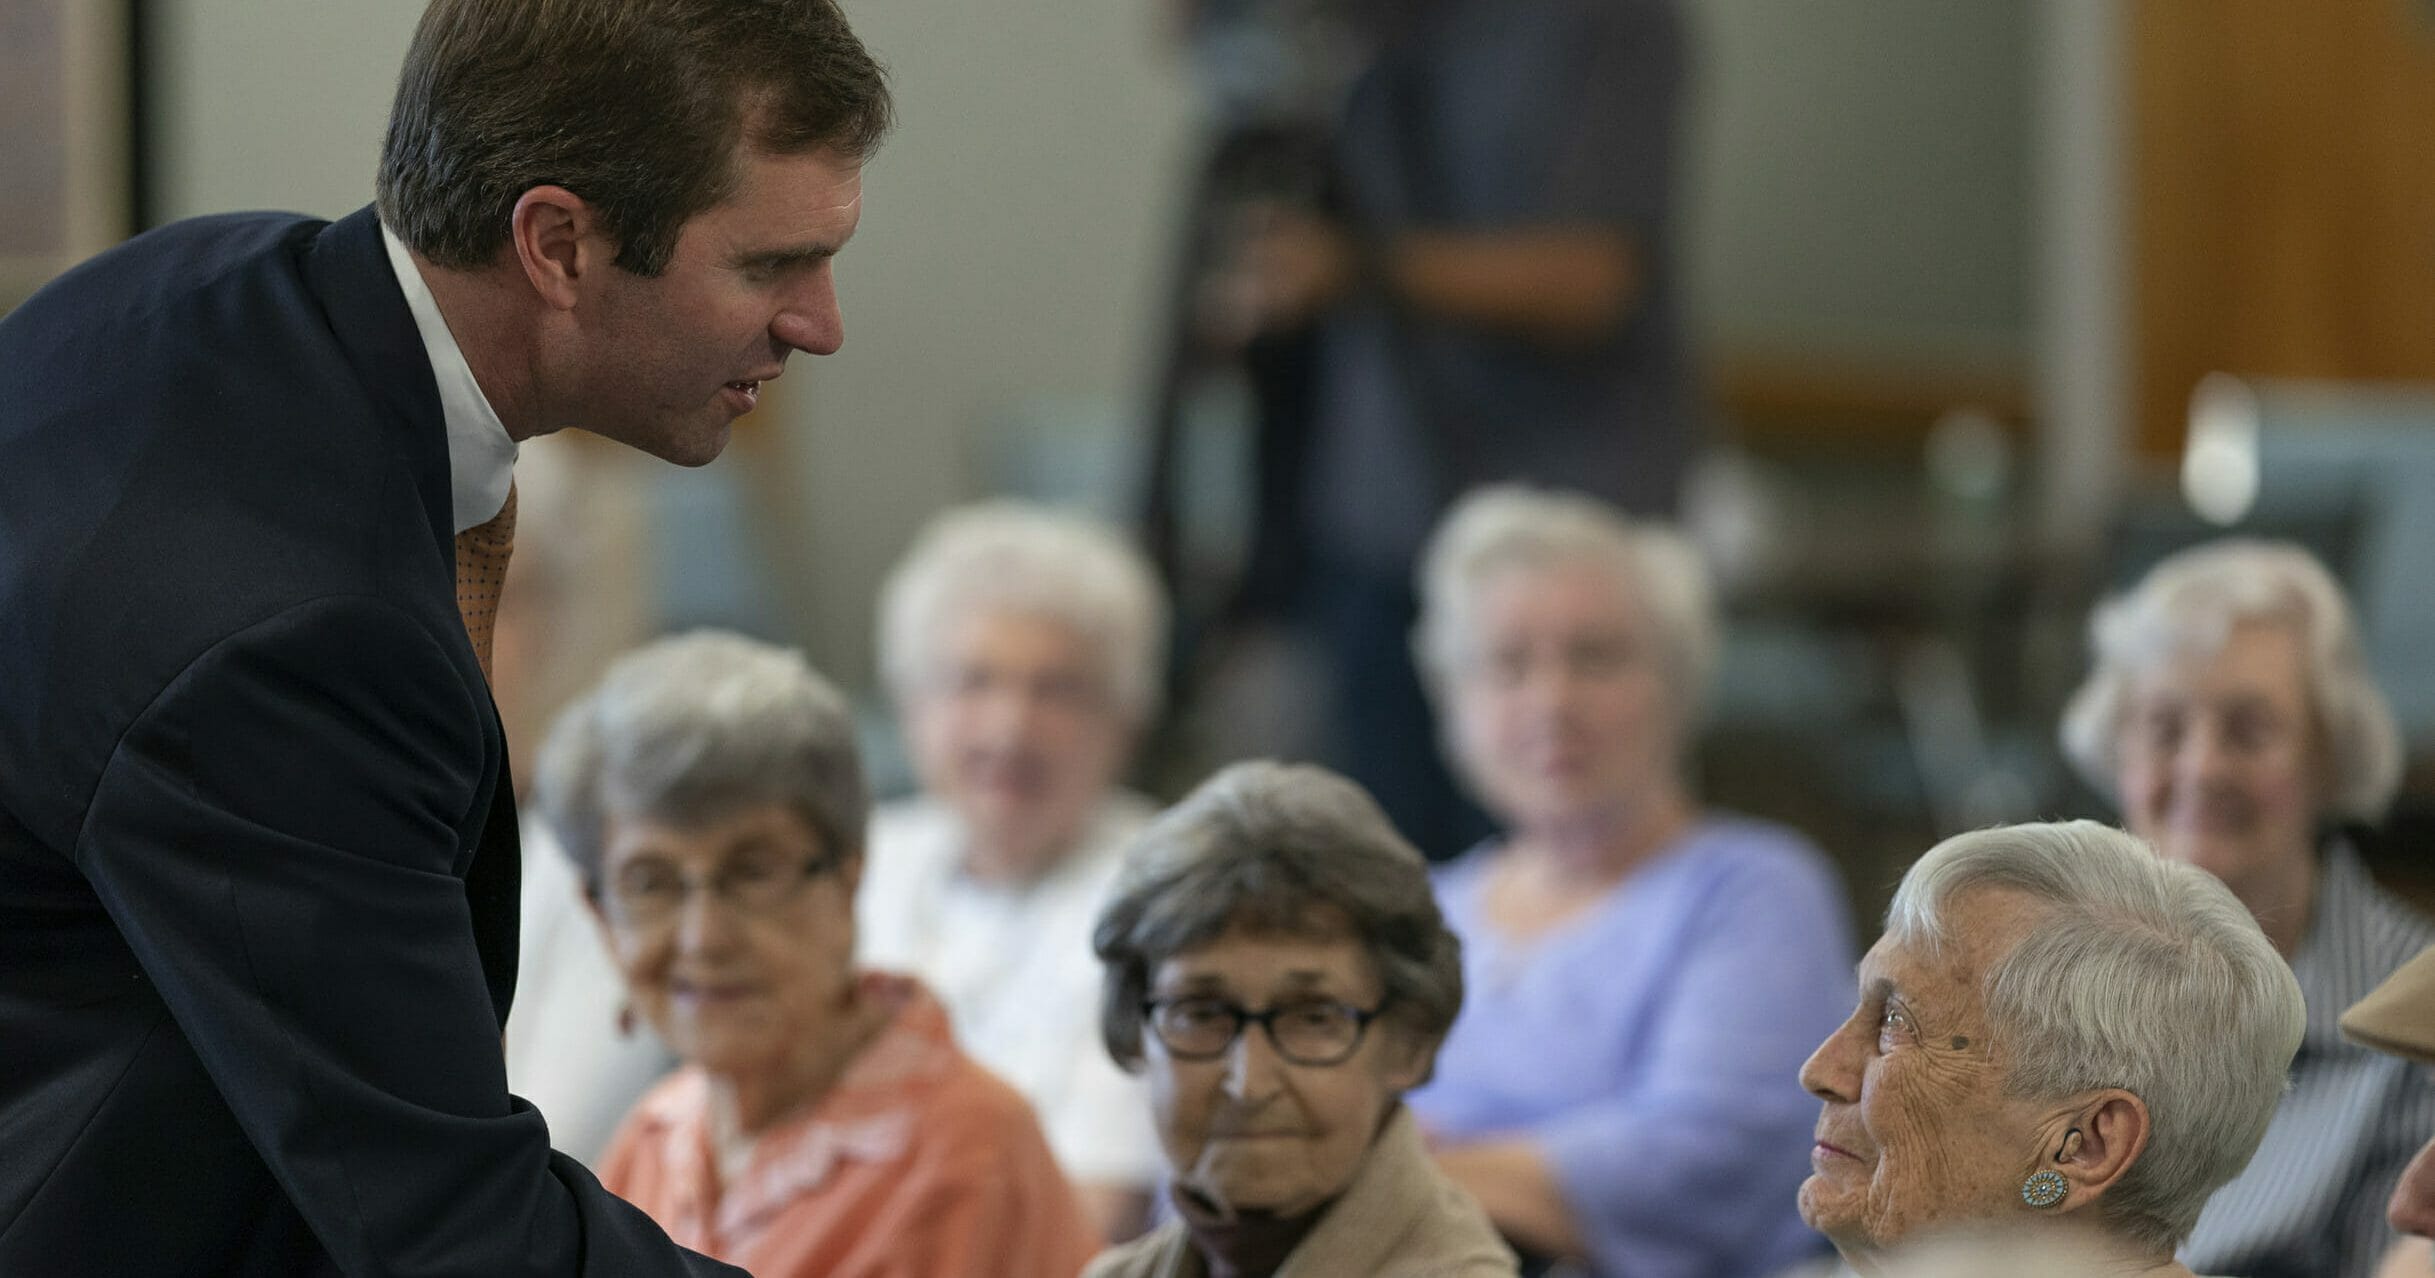 In this Thursday, Sept. 27, 2019, file photo, Kentucky Attorney General and Democratic gubernatorial candidate Andy Beshear greets residents at Sayre Christina Village Senior Living Center in Lexington, Ky